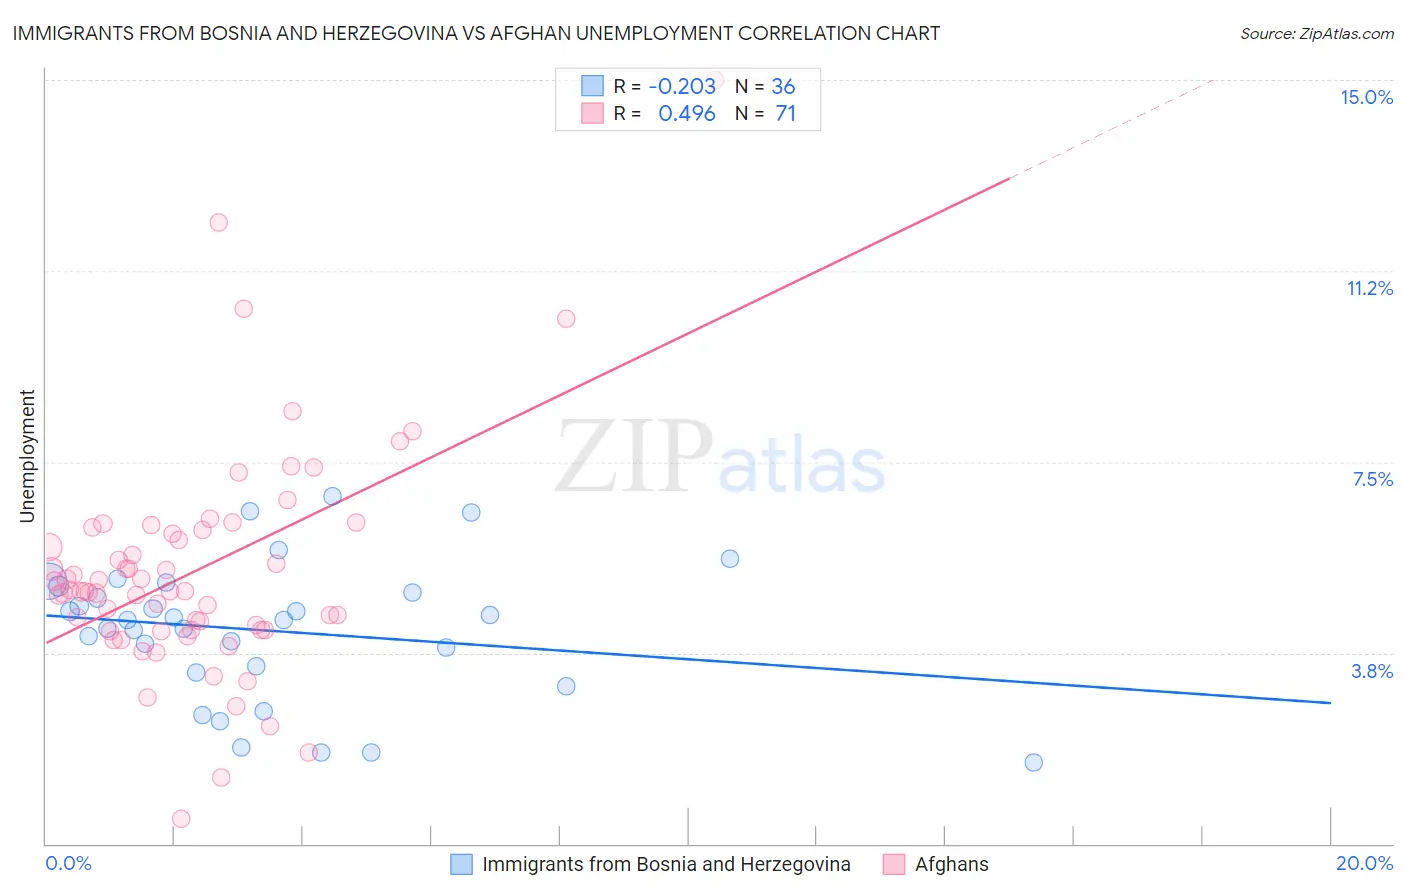 Immigrants from Bosnia and Herzegovina vs Afghan Unemployment